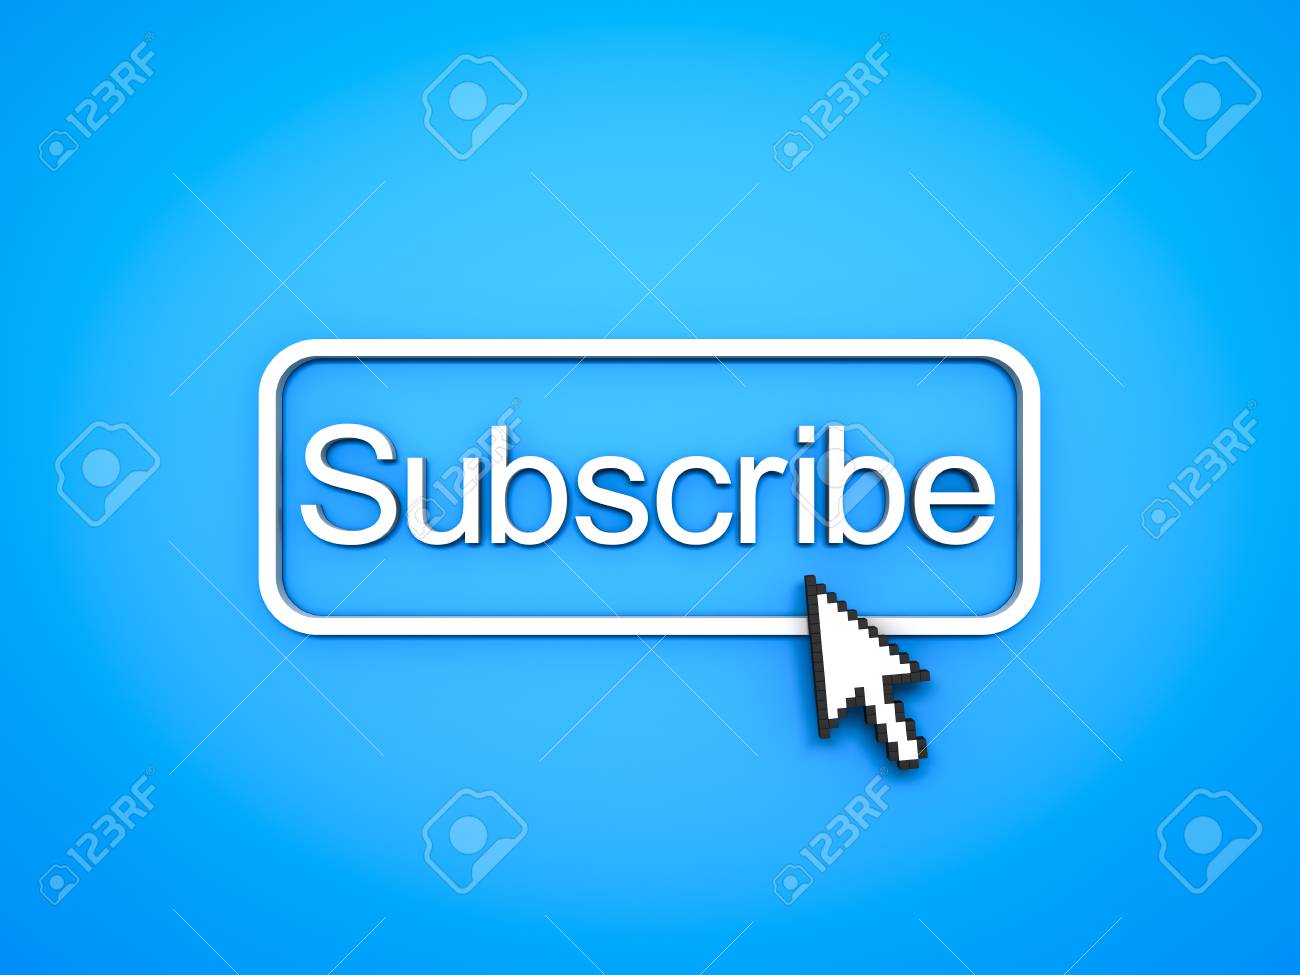 Subscribe Button With Puter Arrow Cursor On Blue Background